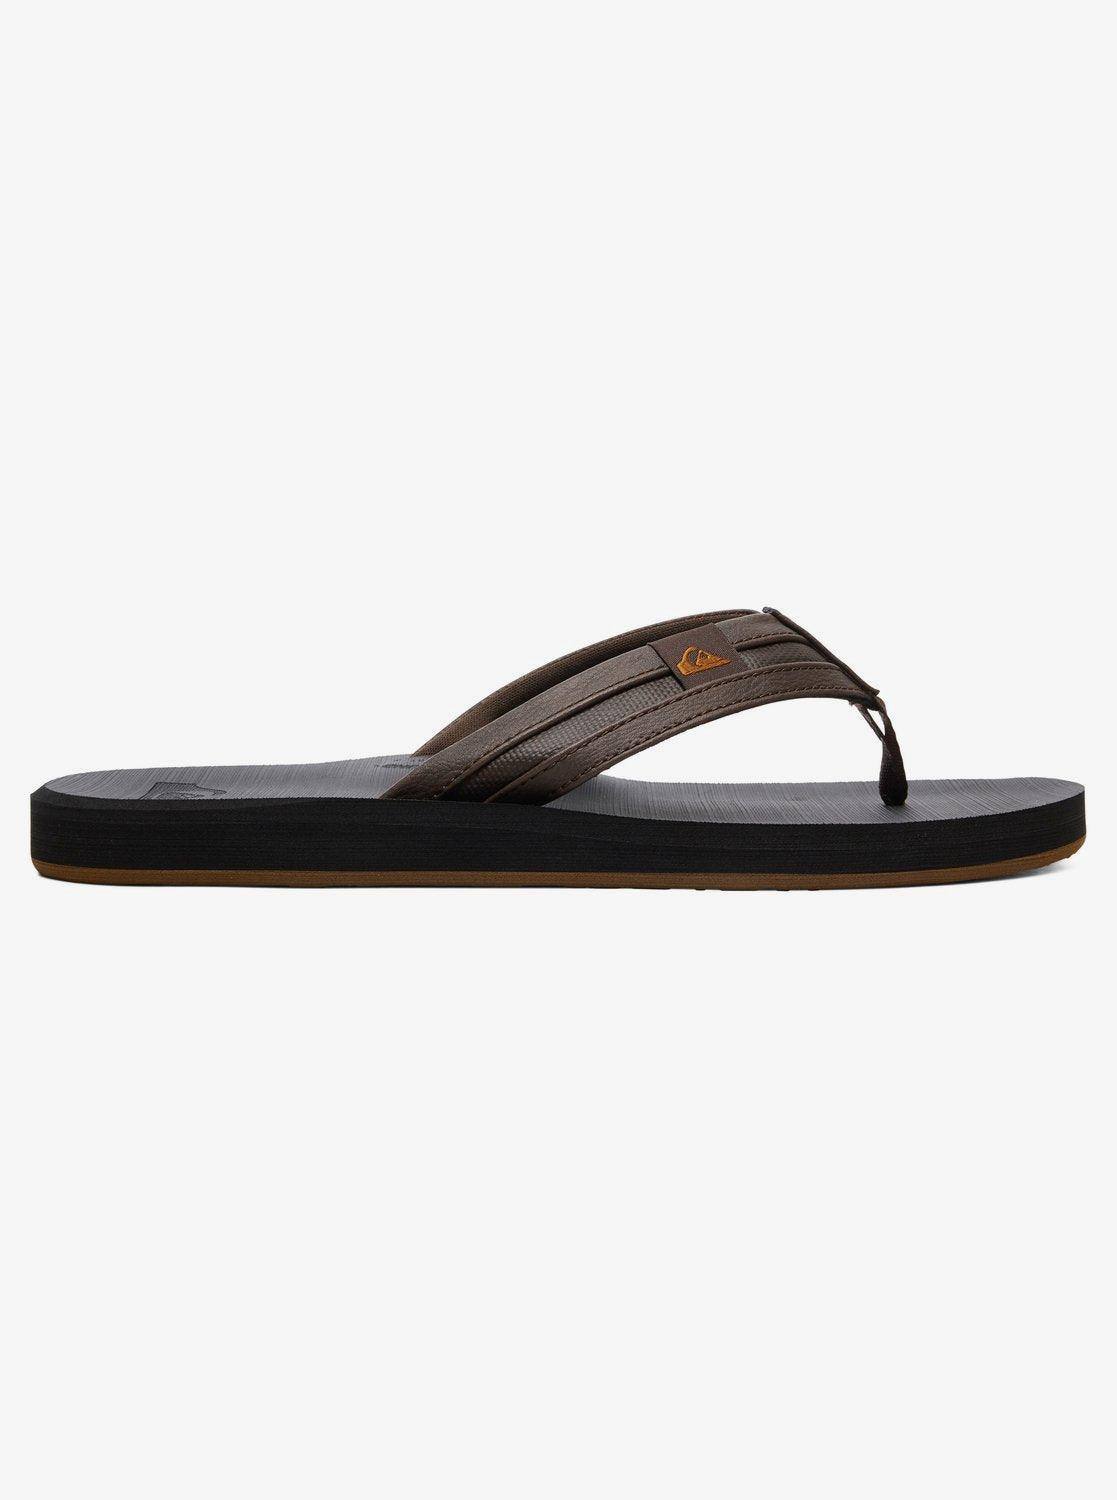 Carver Suede Recycled Sandal - The Shoe Collective